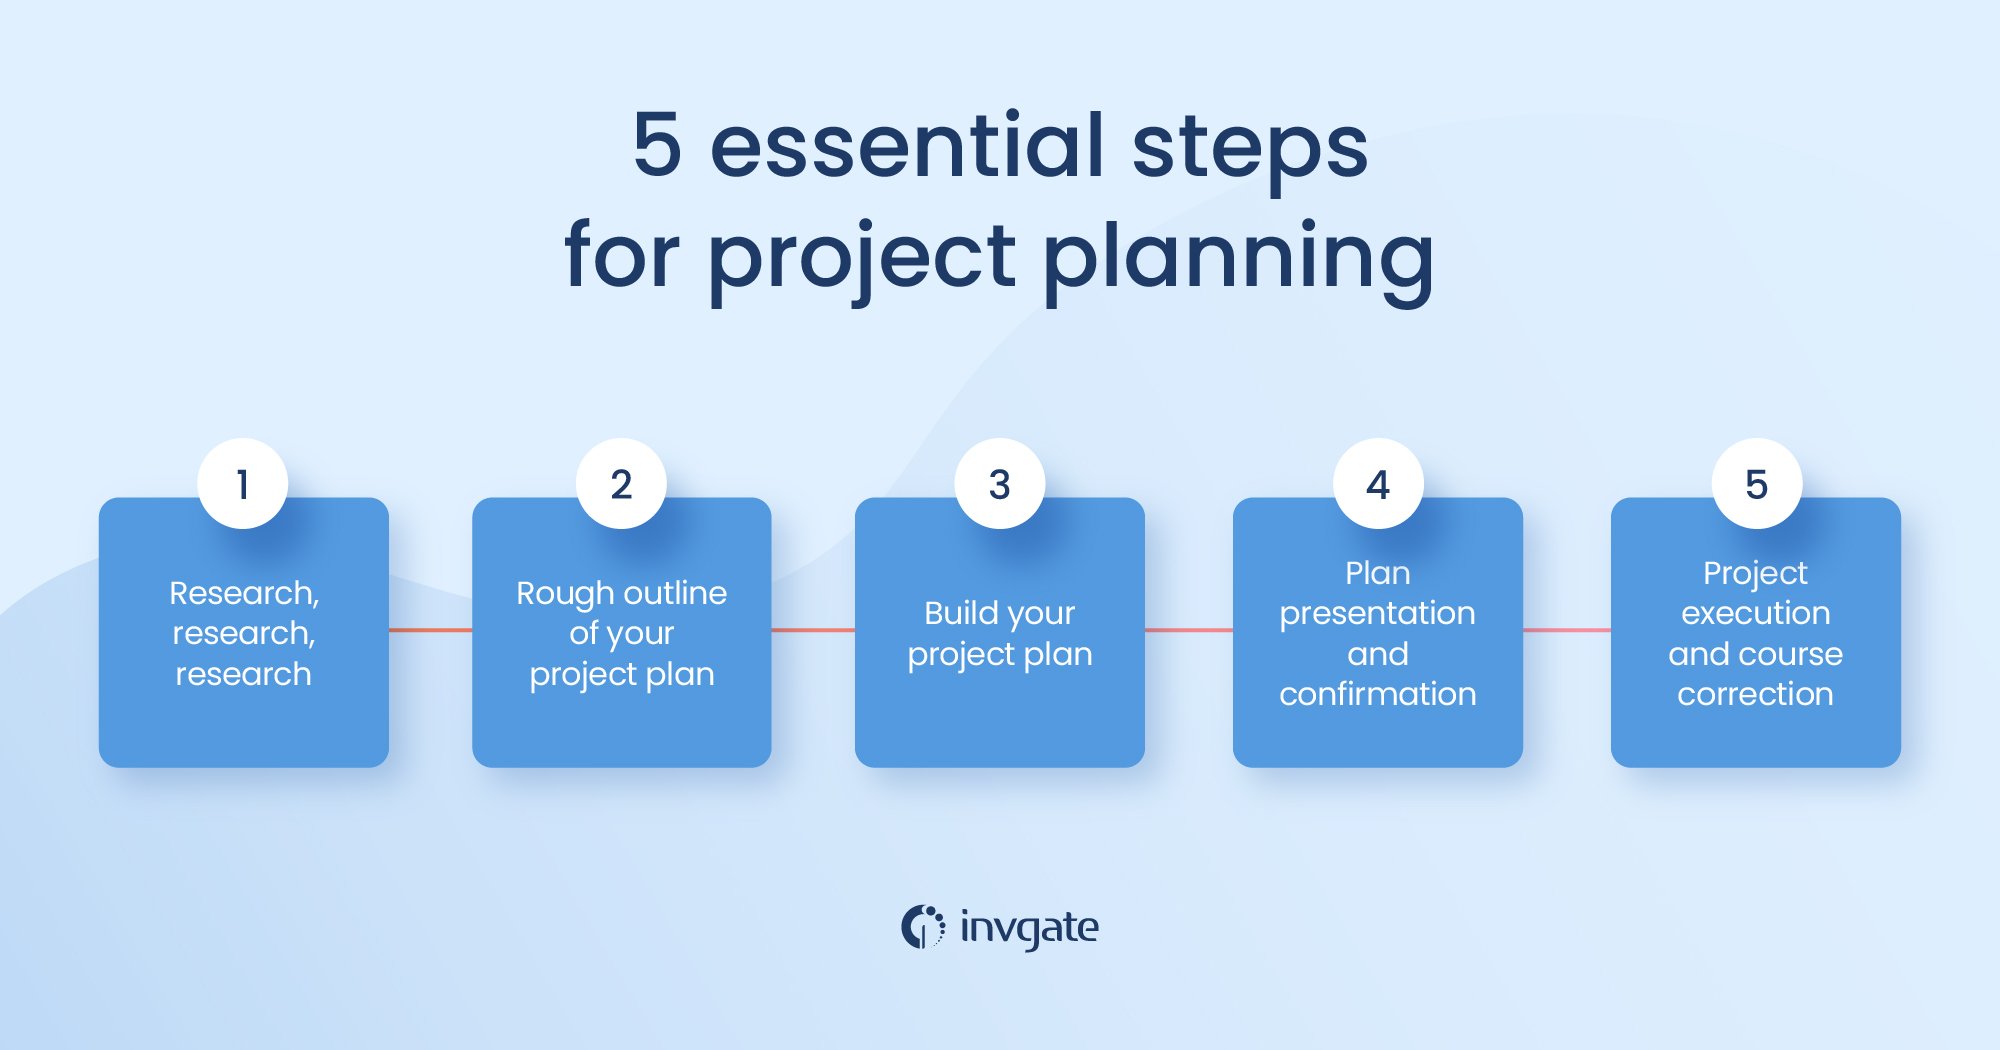 How to ensure your project planning is successful